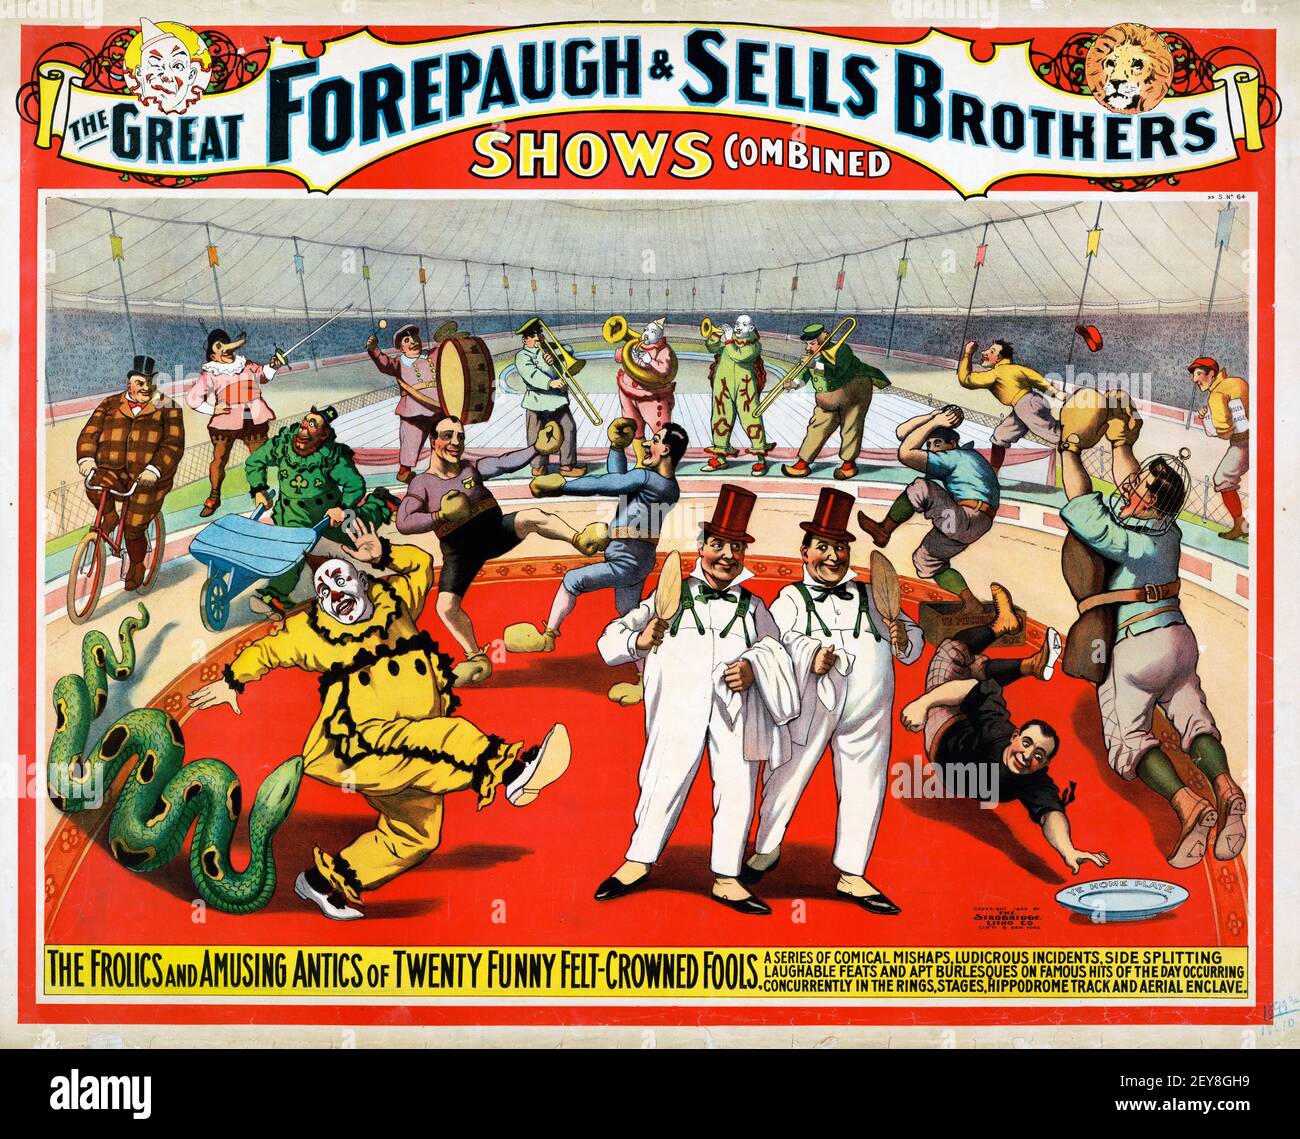 Great Forepaugh & Sells Brothers. Shows combined. Circus Poster 1899, old  and vintage style. Feat The Frolics and Amusing Antics of Twenty Funny  Stock Photo - Alamy